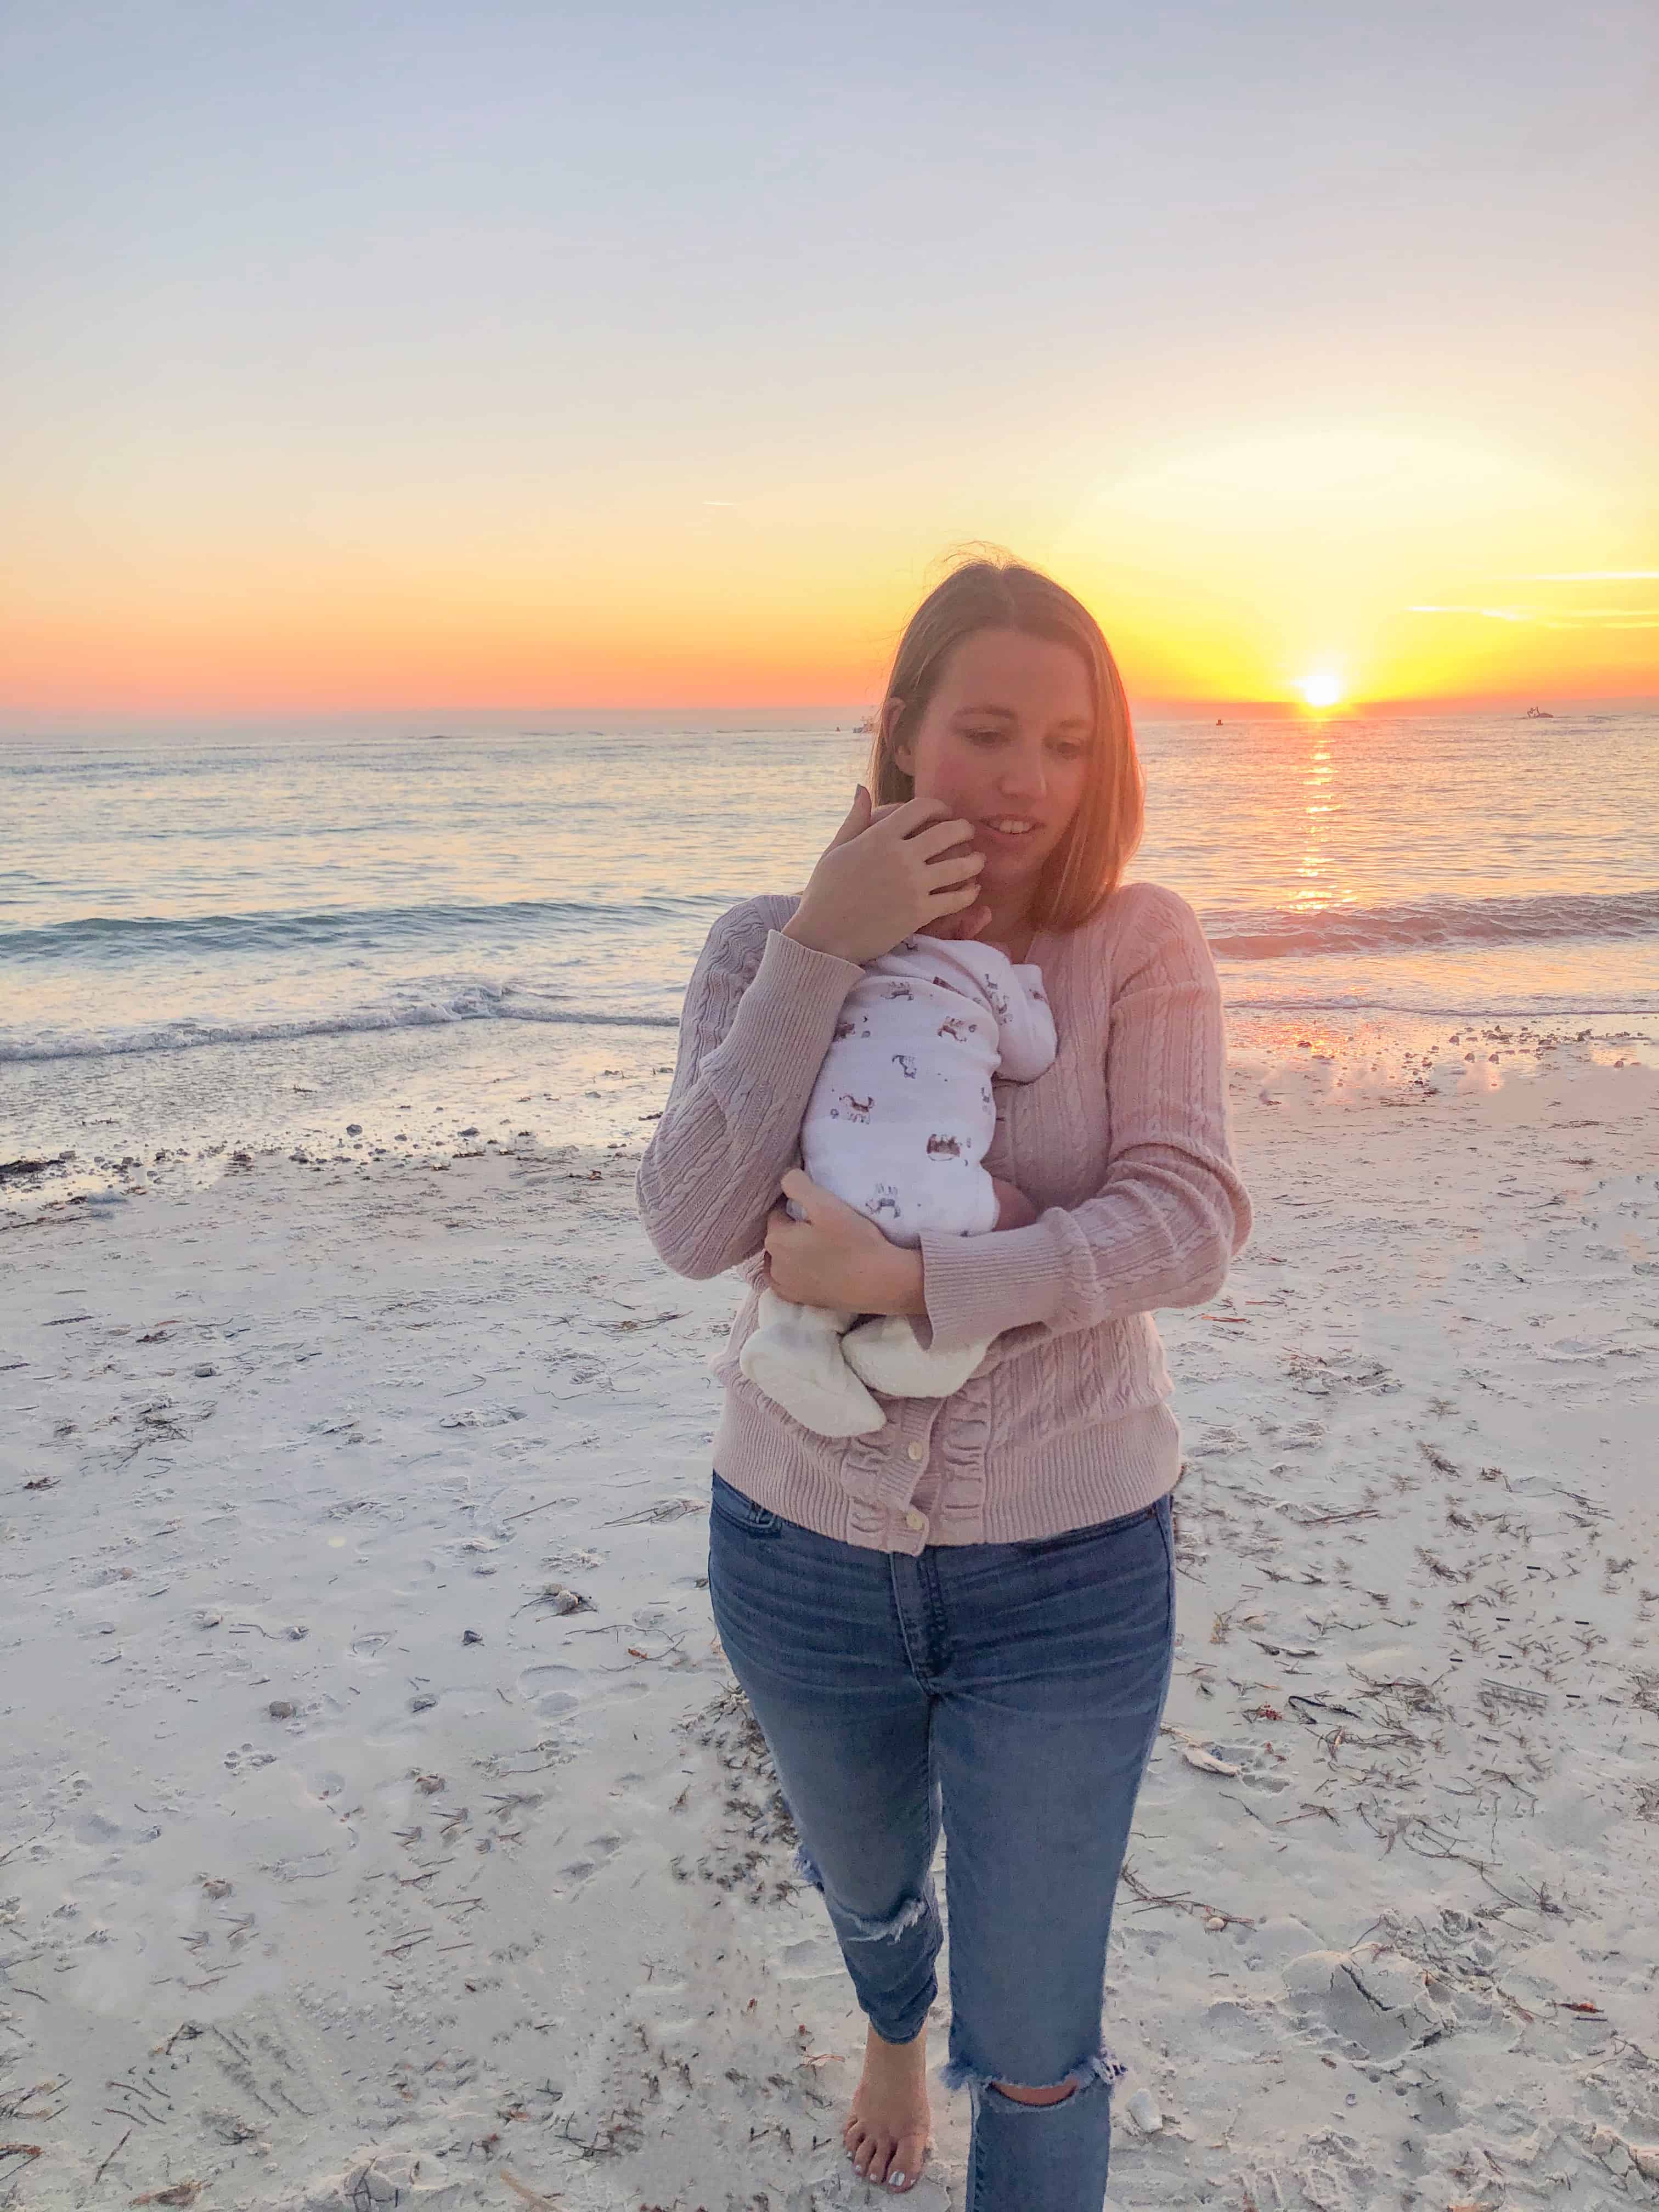 Our first "big" adventure was taking our one month old to honeymoon island to see sunset on the beach.